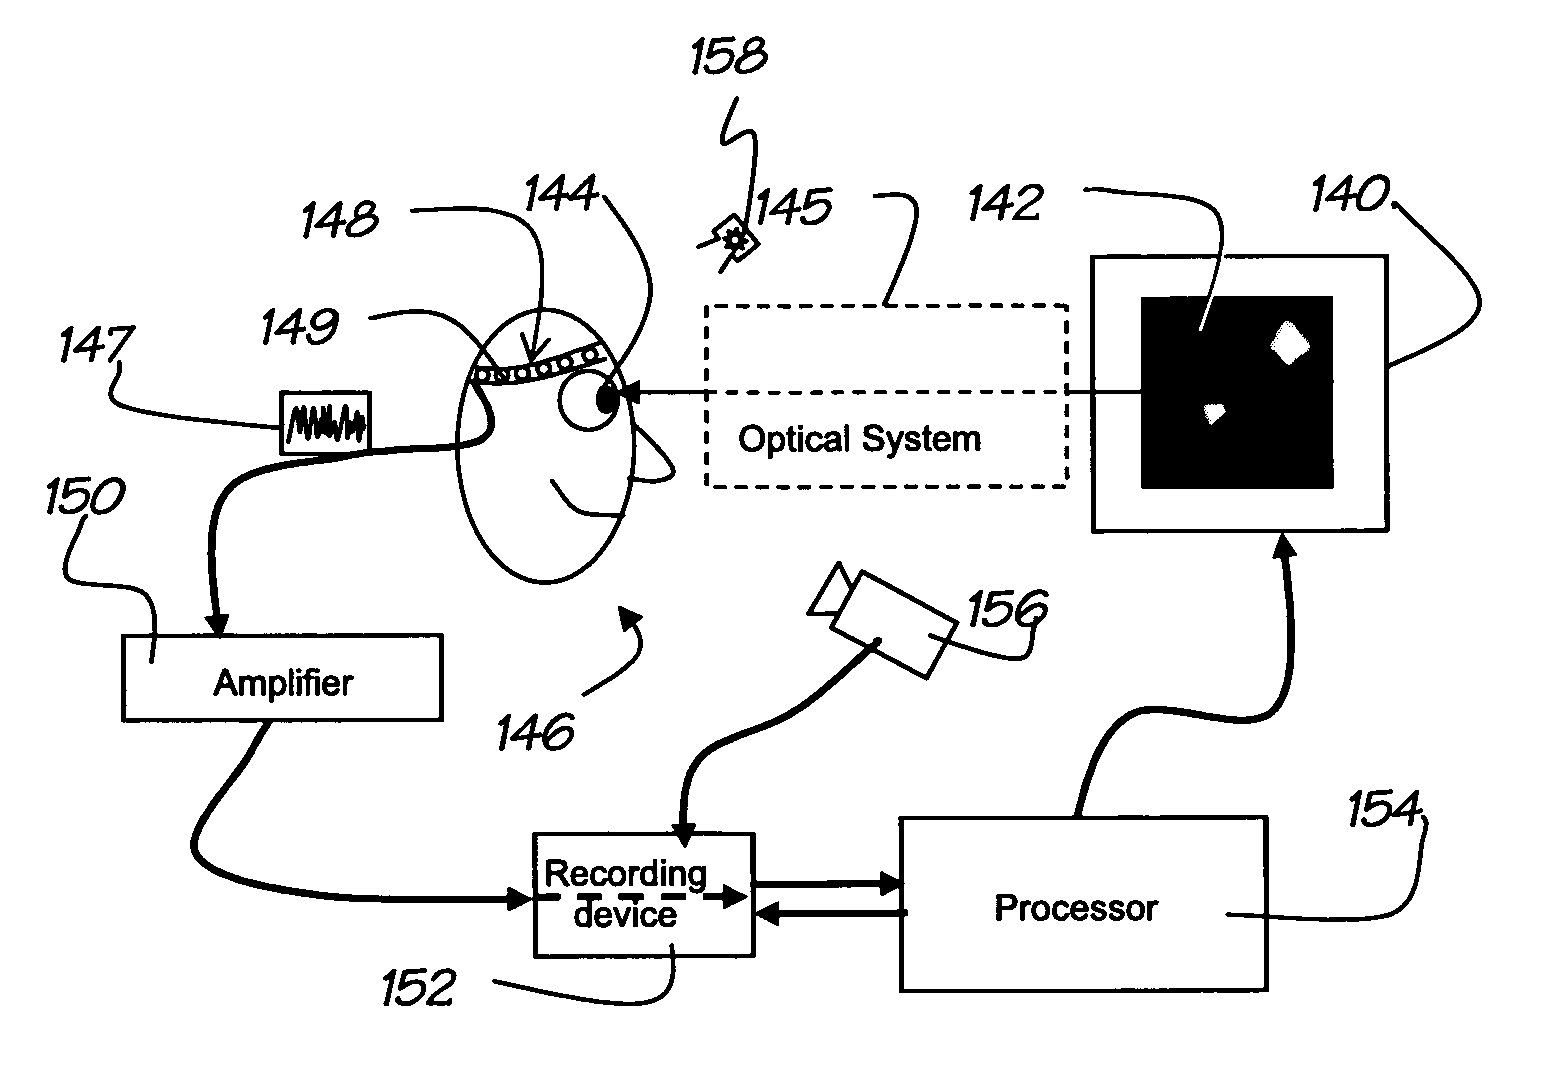 Method and Apparatus for Sensory Field Assessment